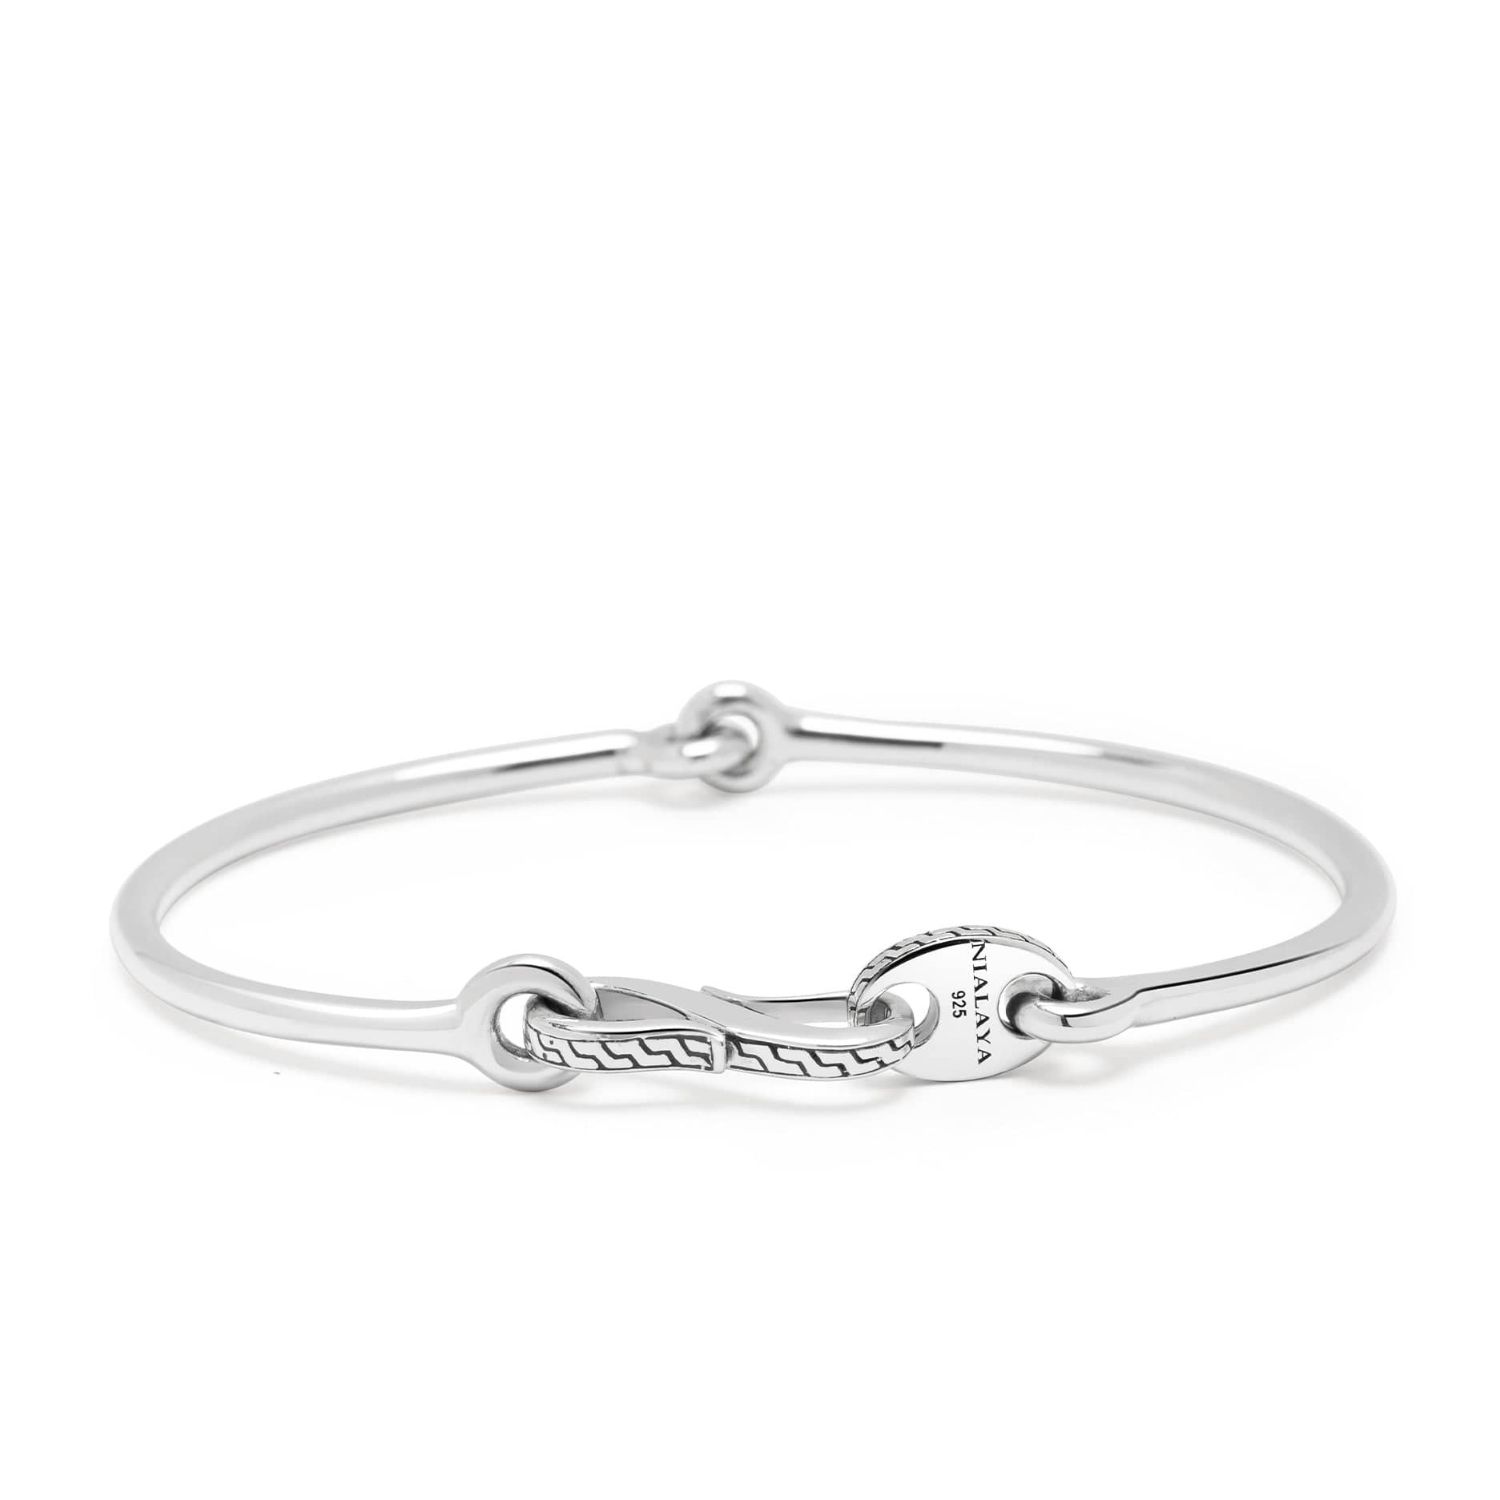 Nialaya Men's Delicate Sterling Silver Bangle With Hook Clasp